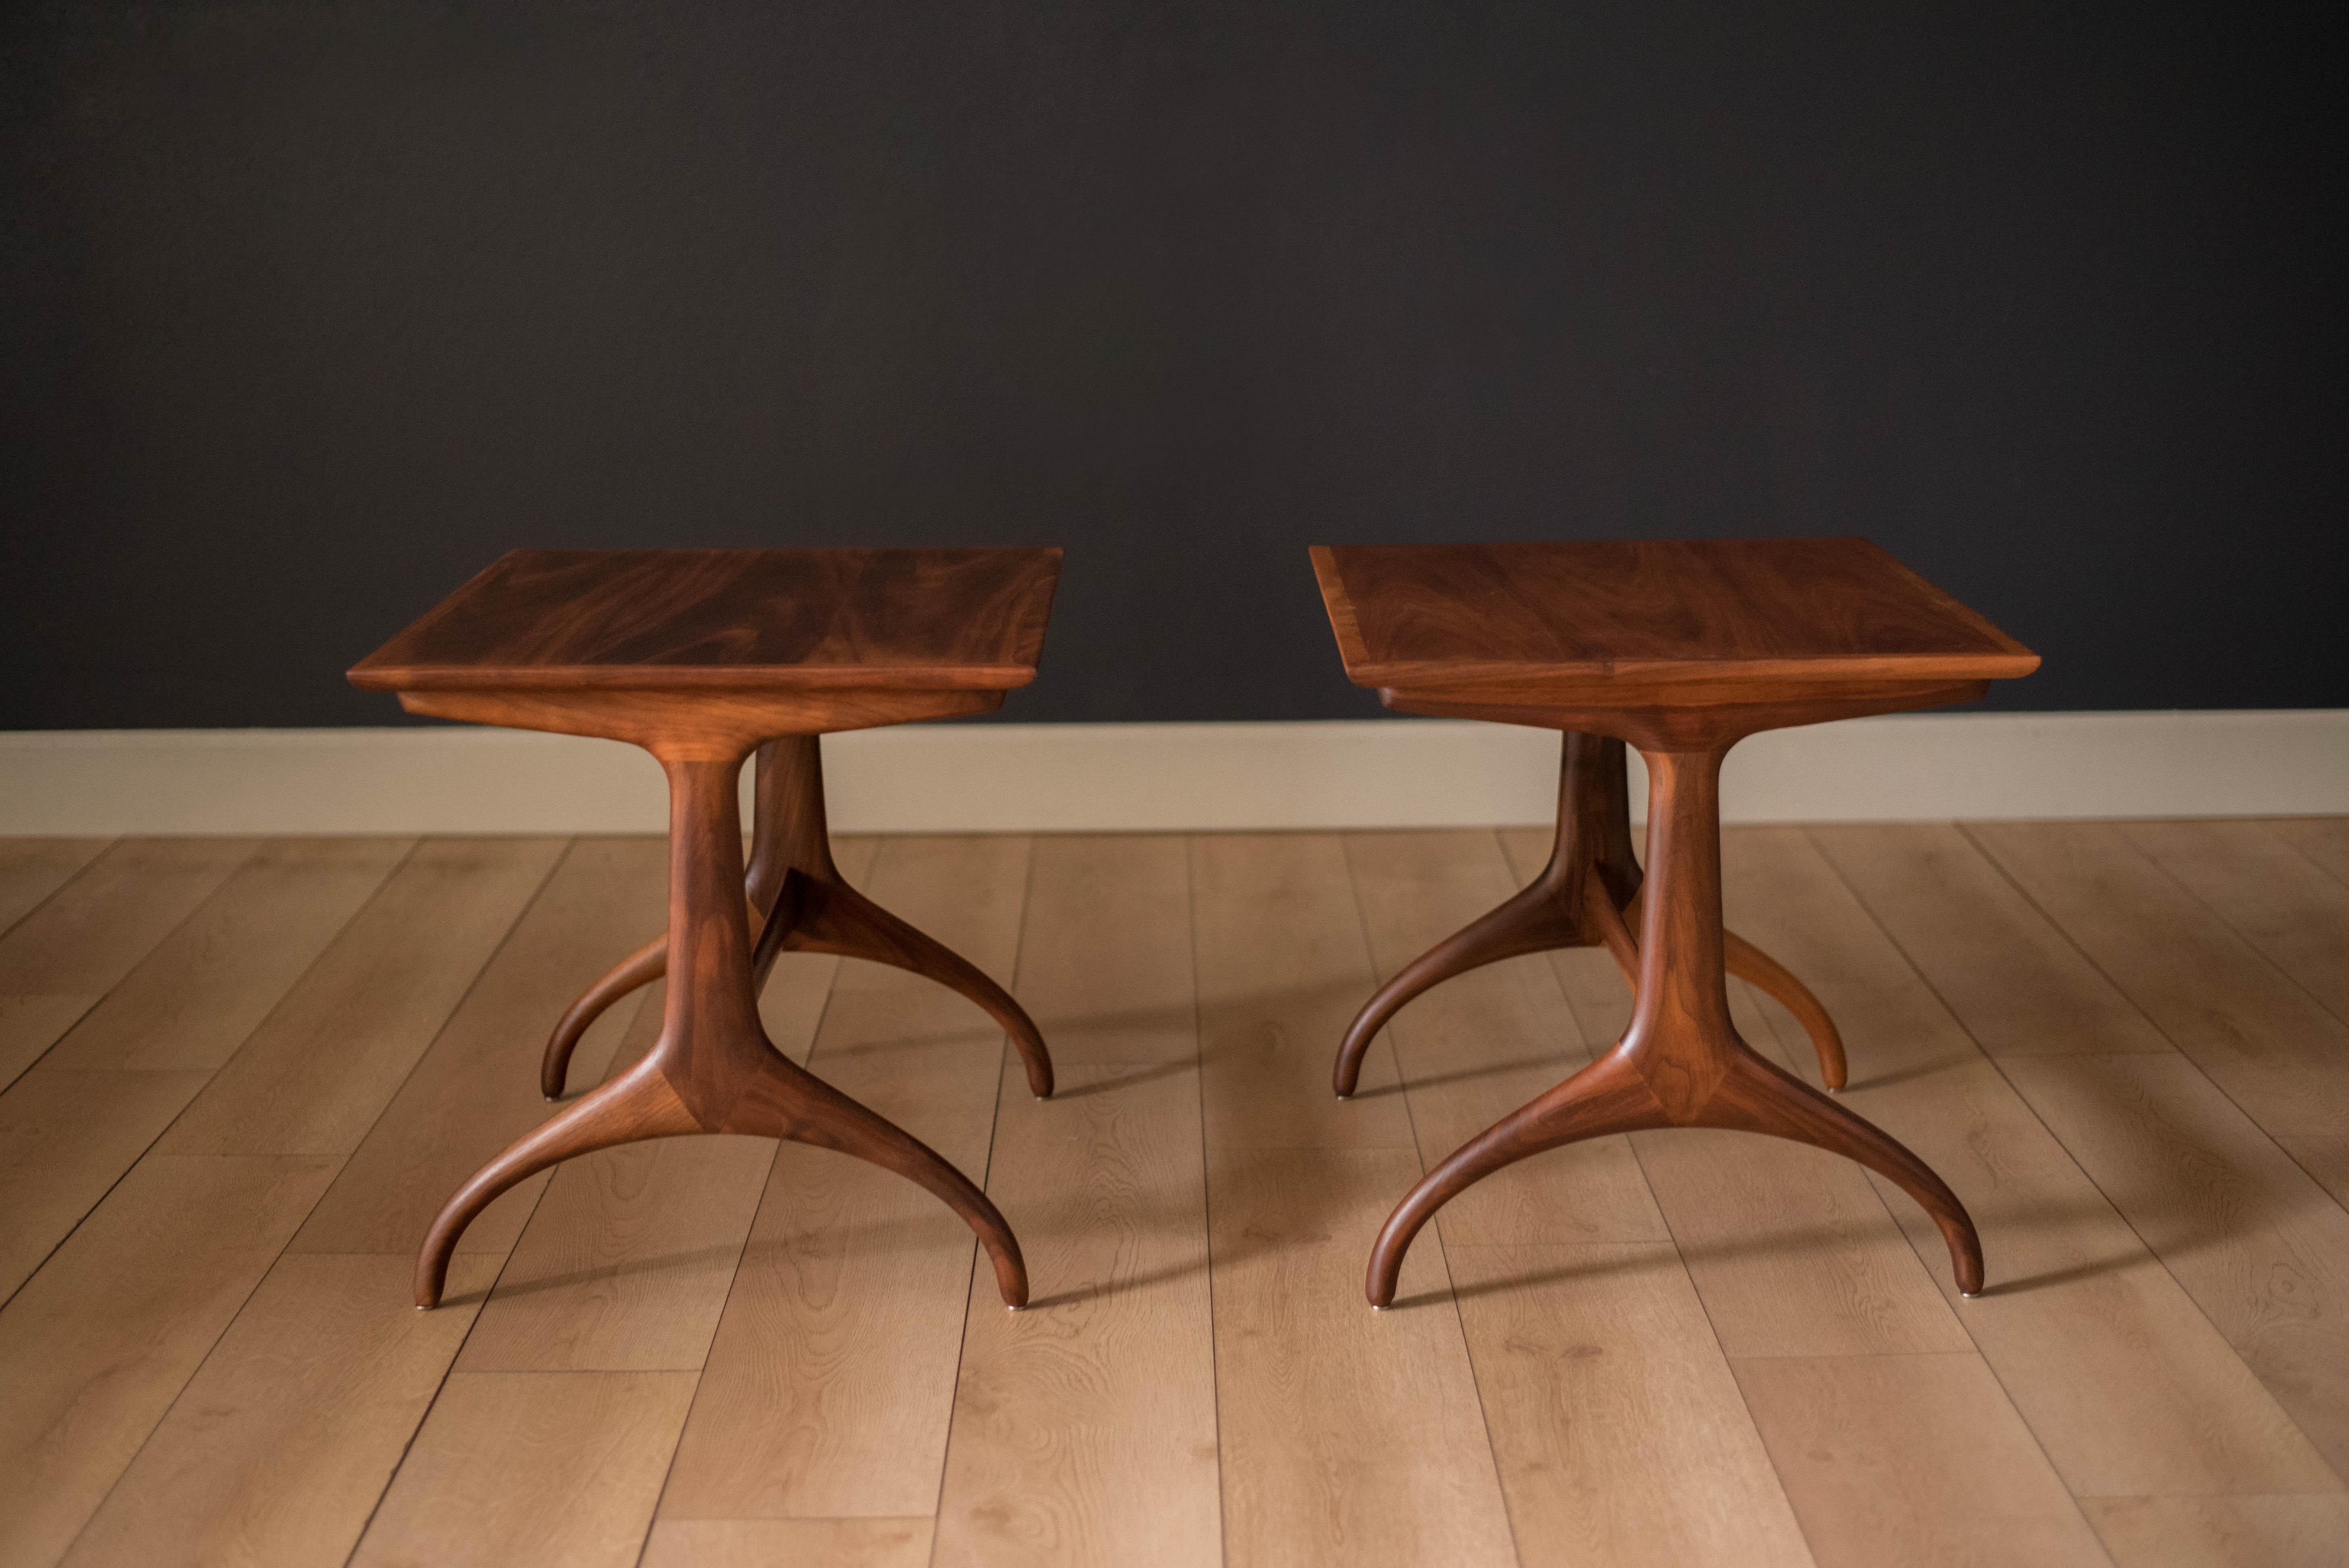 Vintage pair of side tables in walnut by Heritage Henredon, circa 1960s. This classic set features a rectangular shaped top with sculptural wishbone legs. Perfect for any Mid-Century Modern or contemporary decor. Price is for the pair.


Offered by